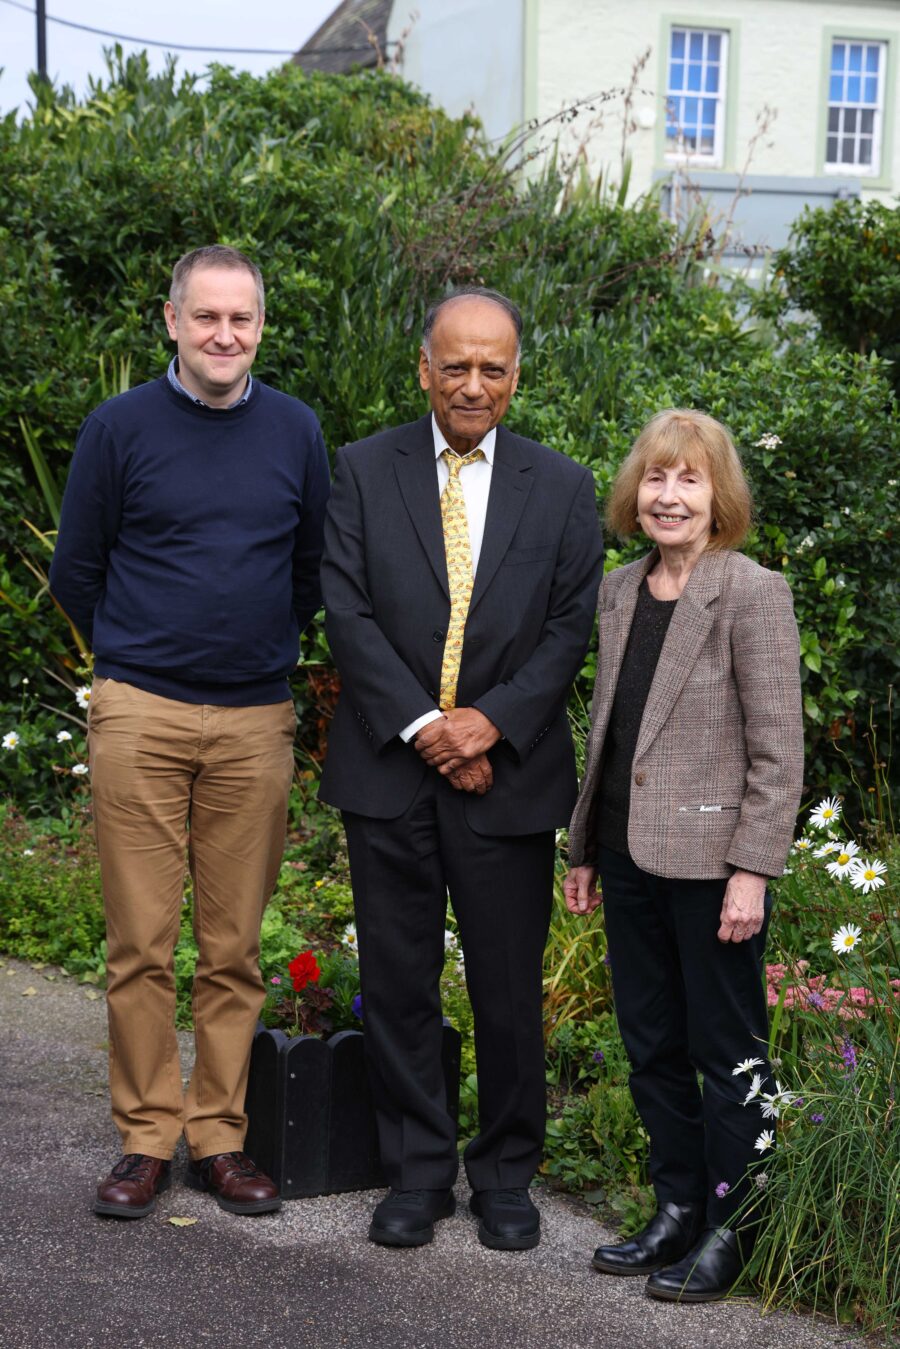 Professor Sir Partha Dasgupta stands in Wigtown Gardens with two other people.